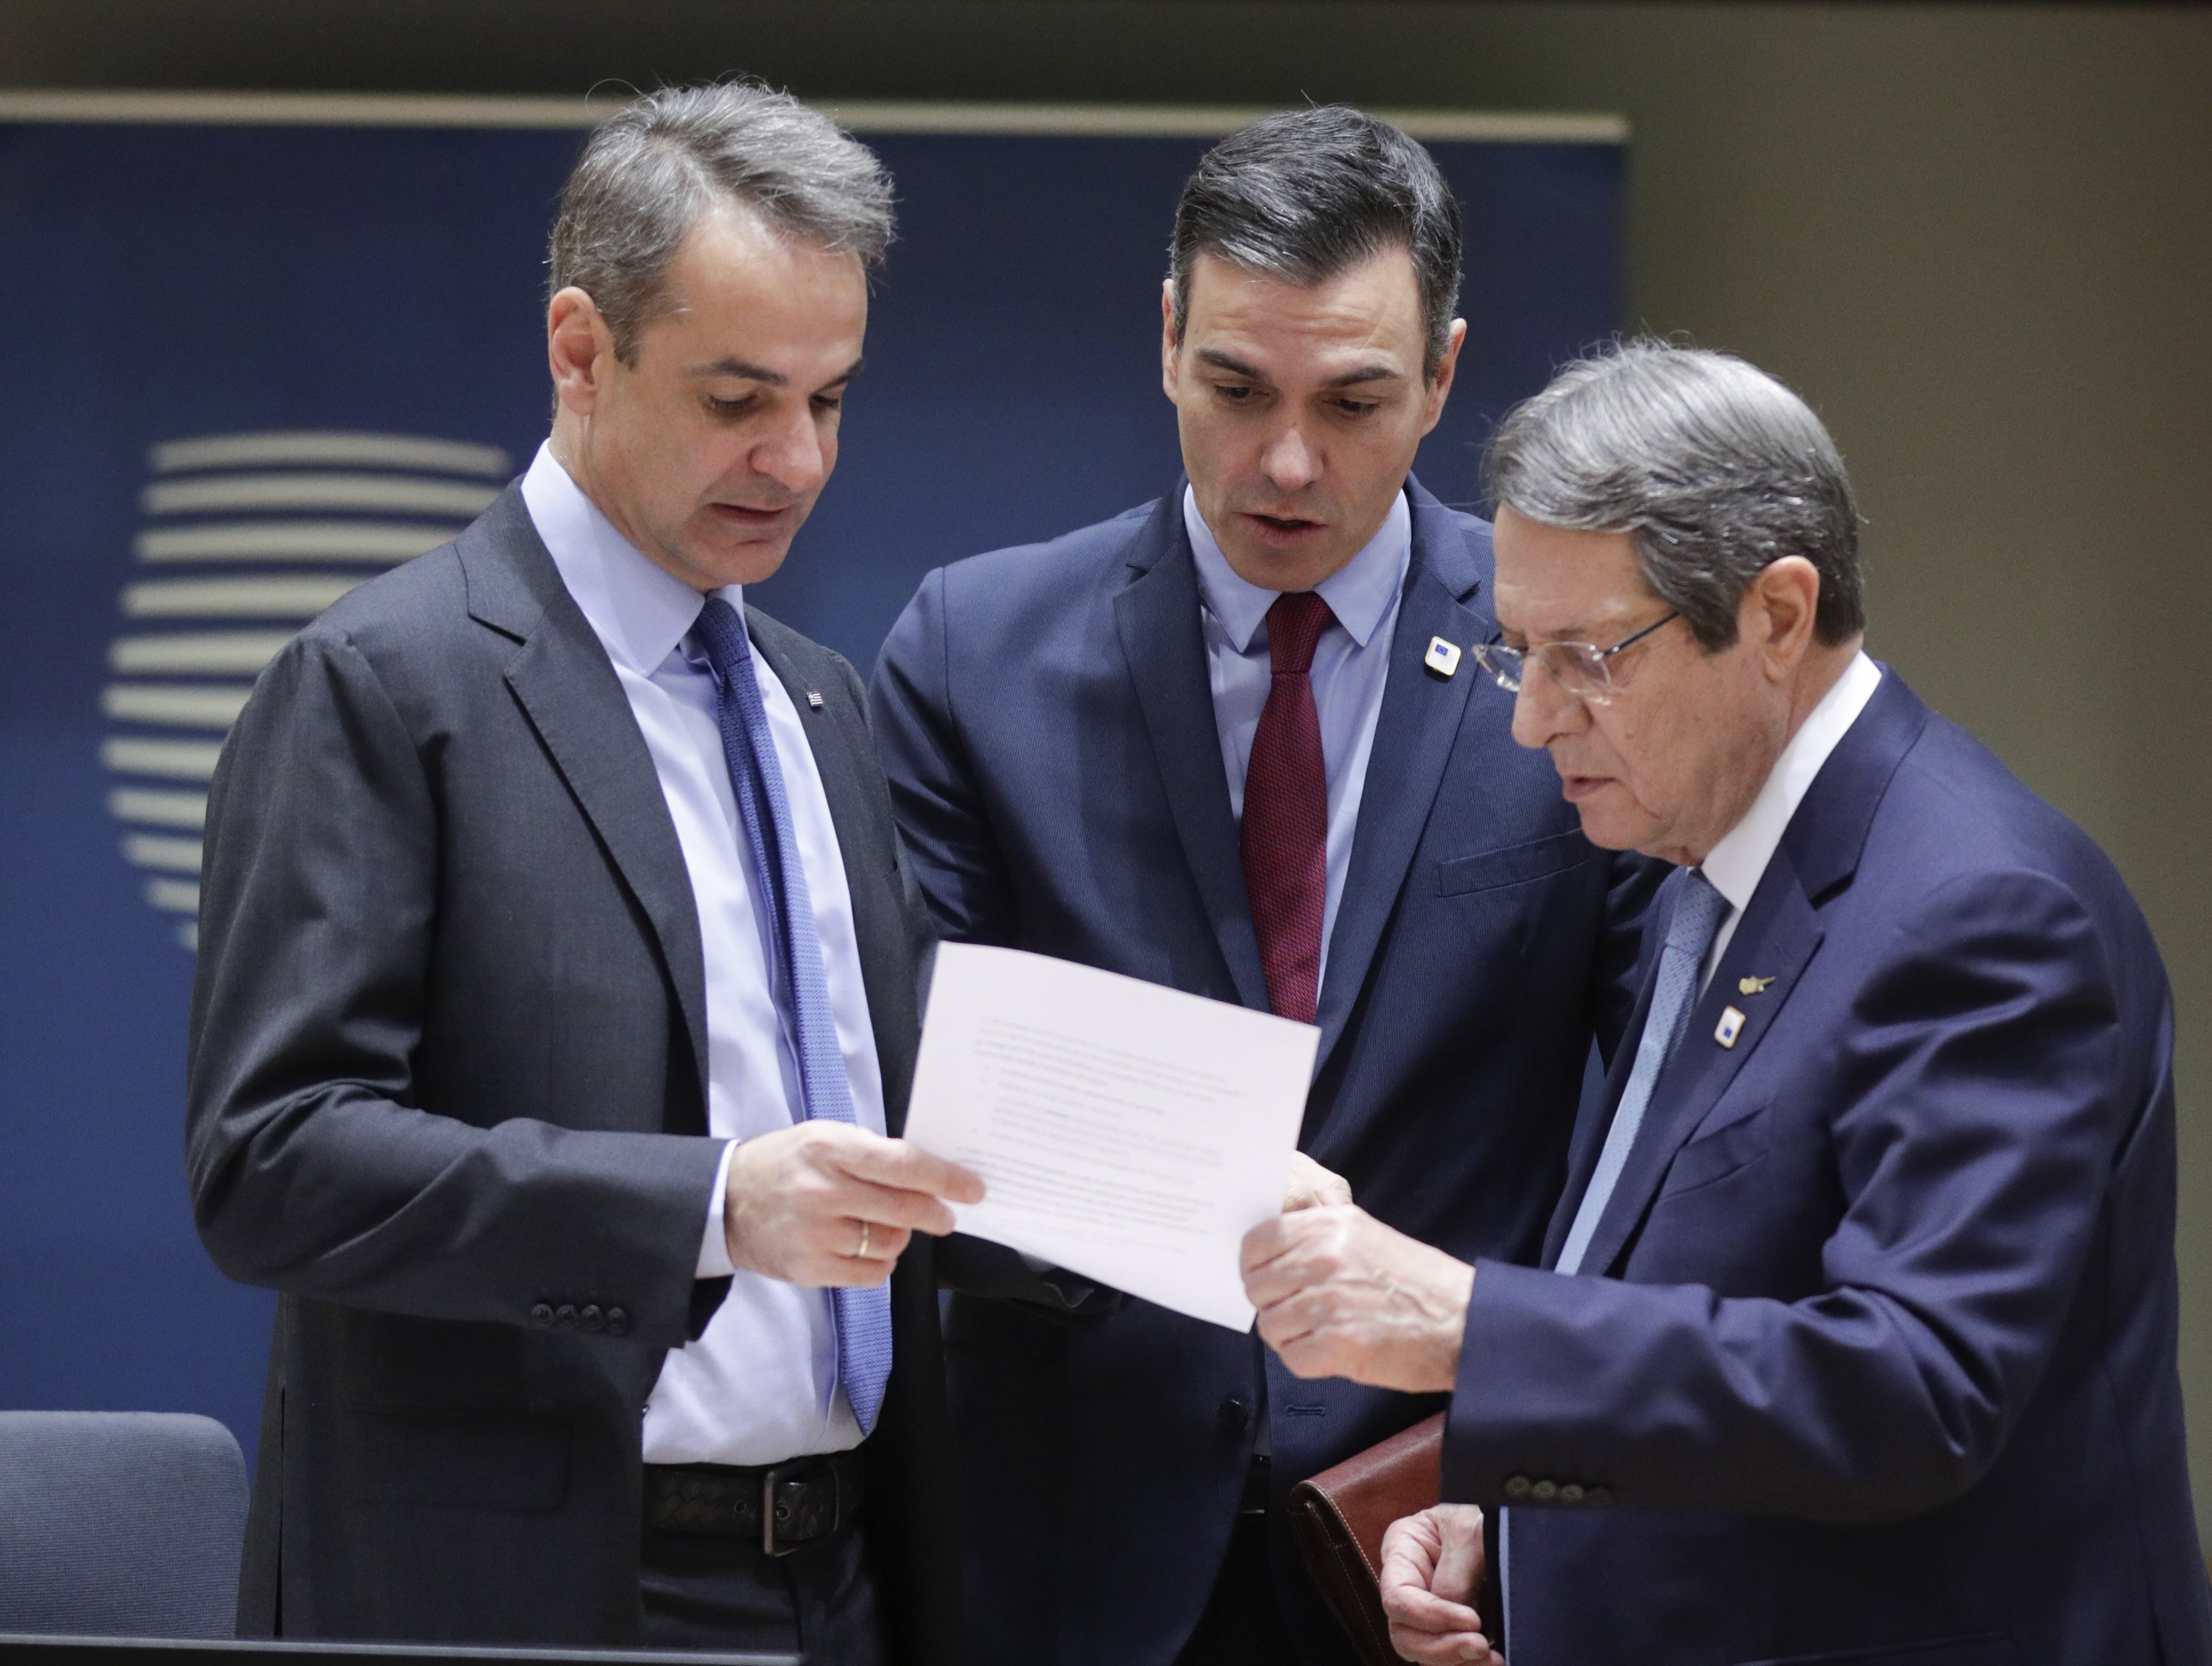 Spanish PM's boil-over interrupts European Council energy meeting: "I need some air"